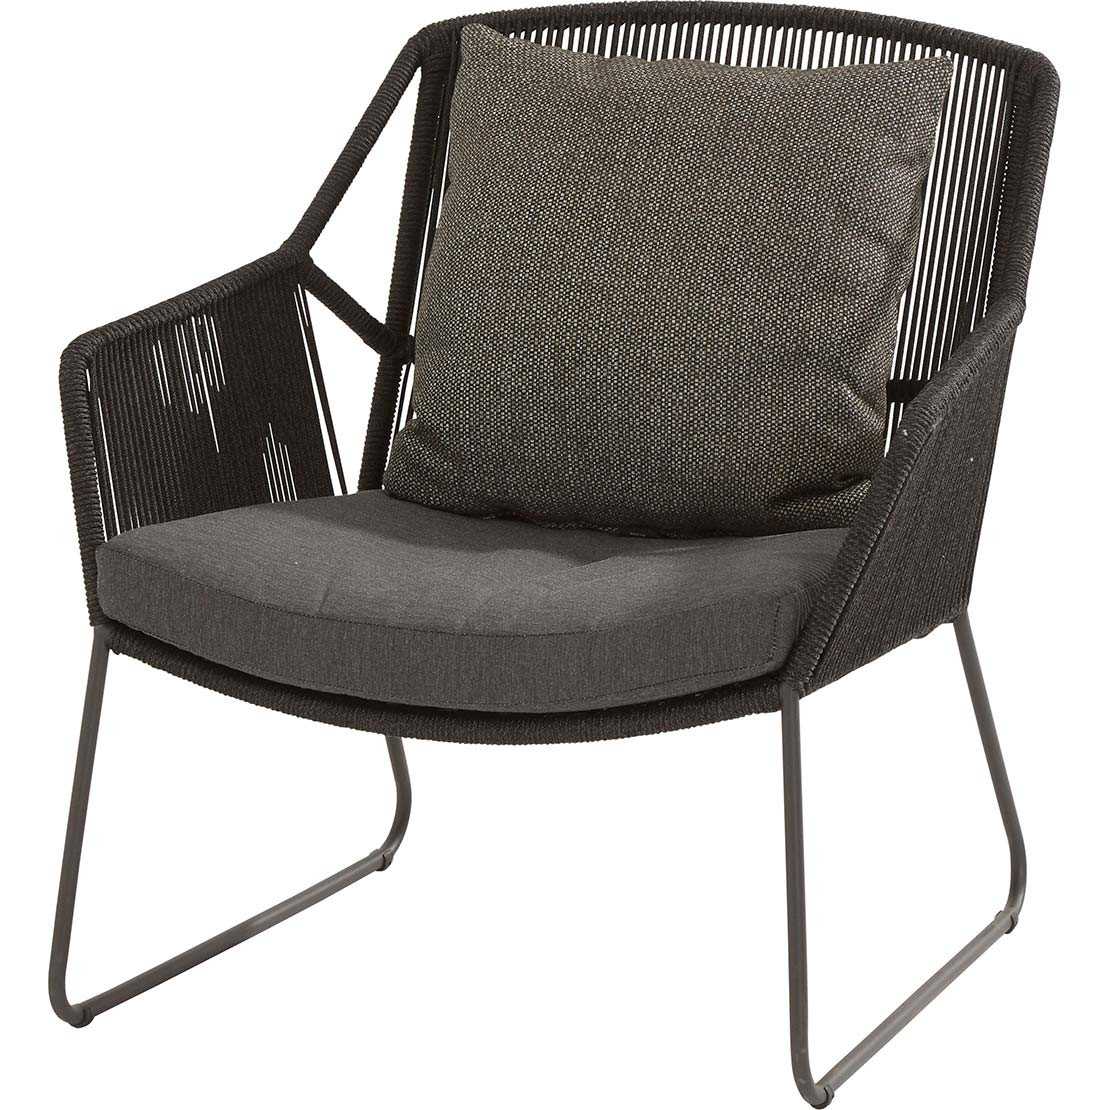 Accor living chair with 2 cushions